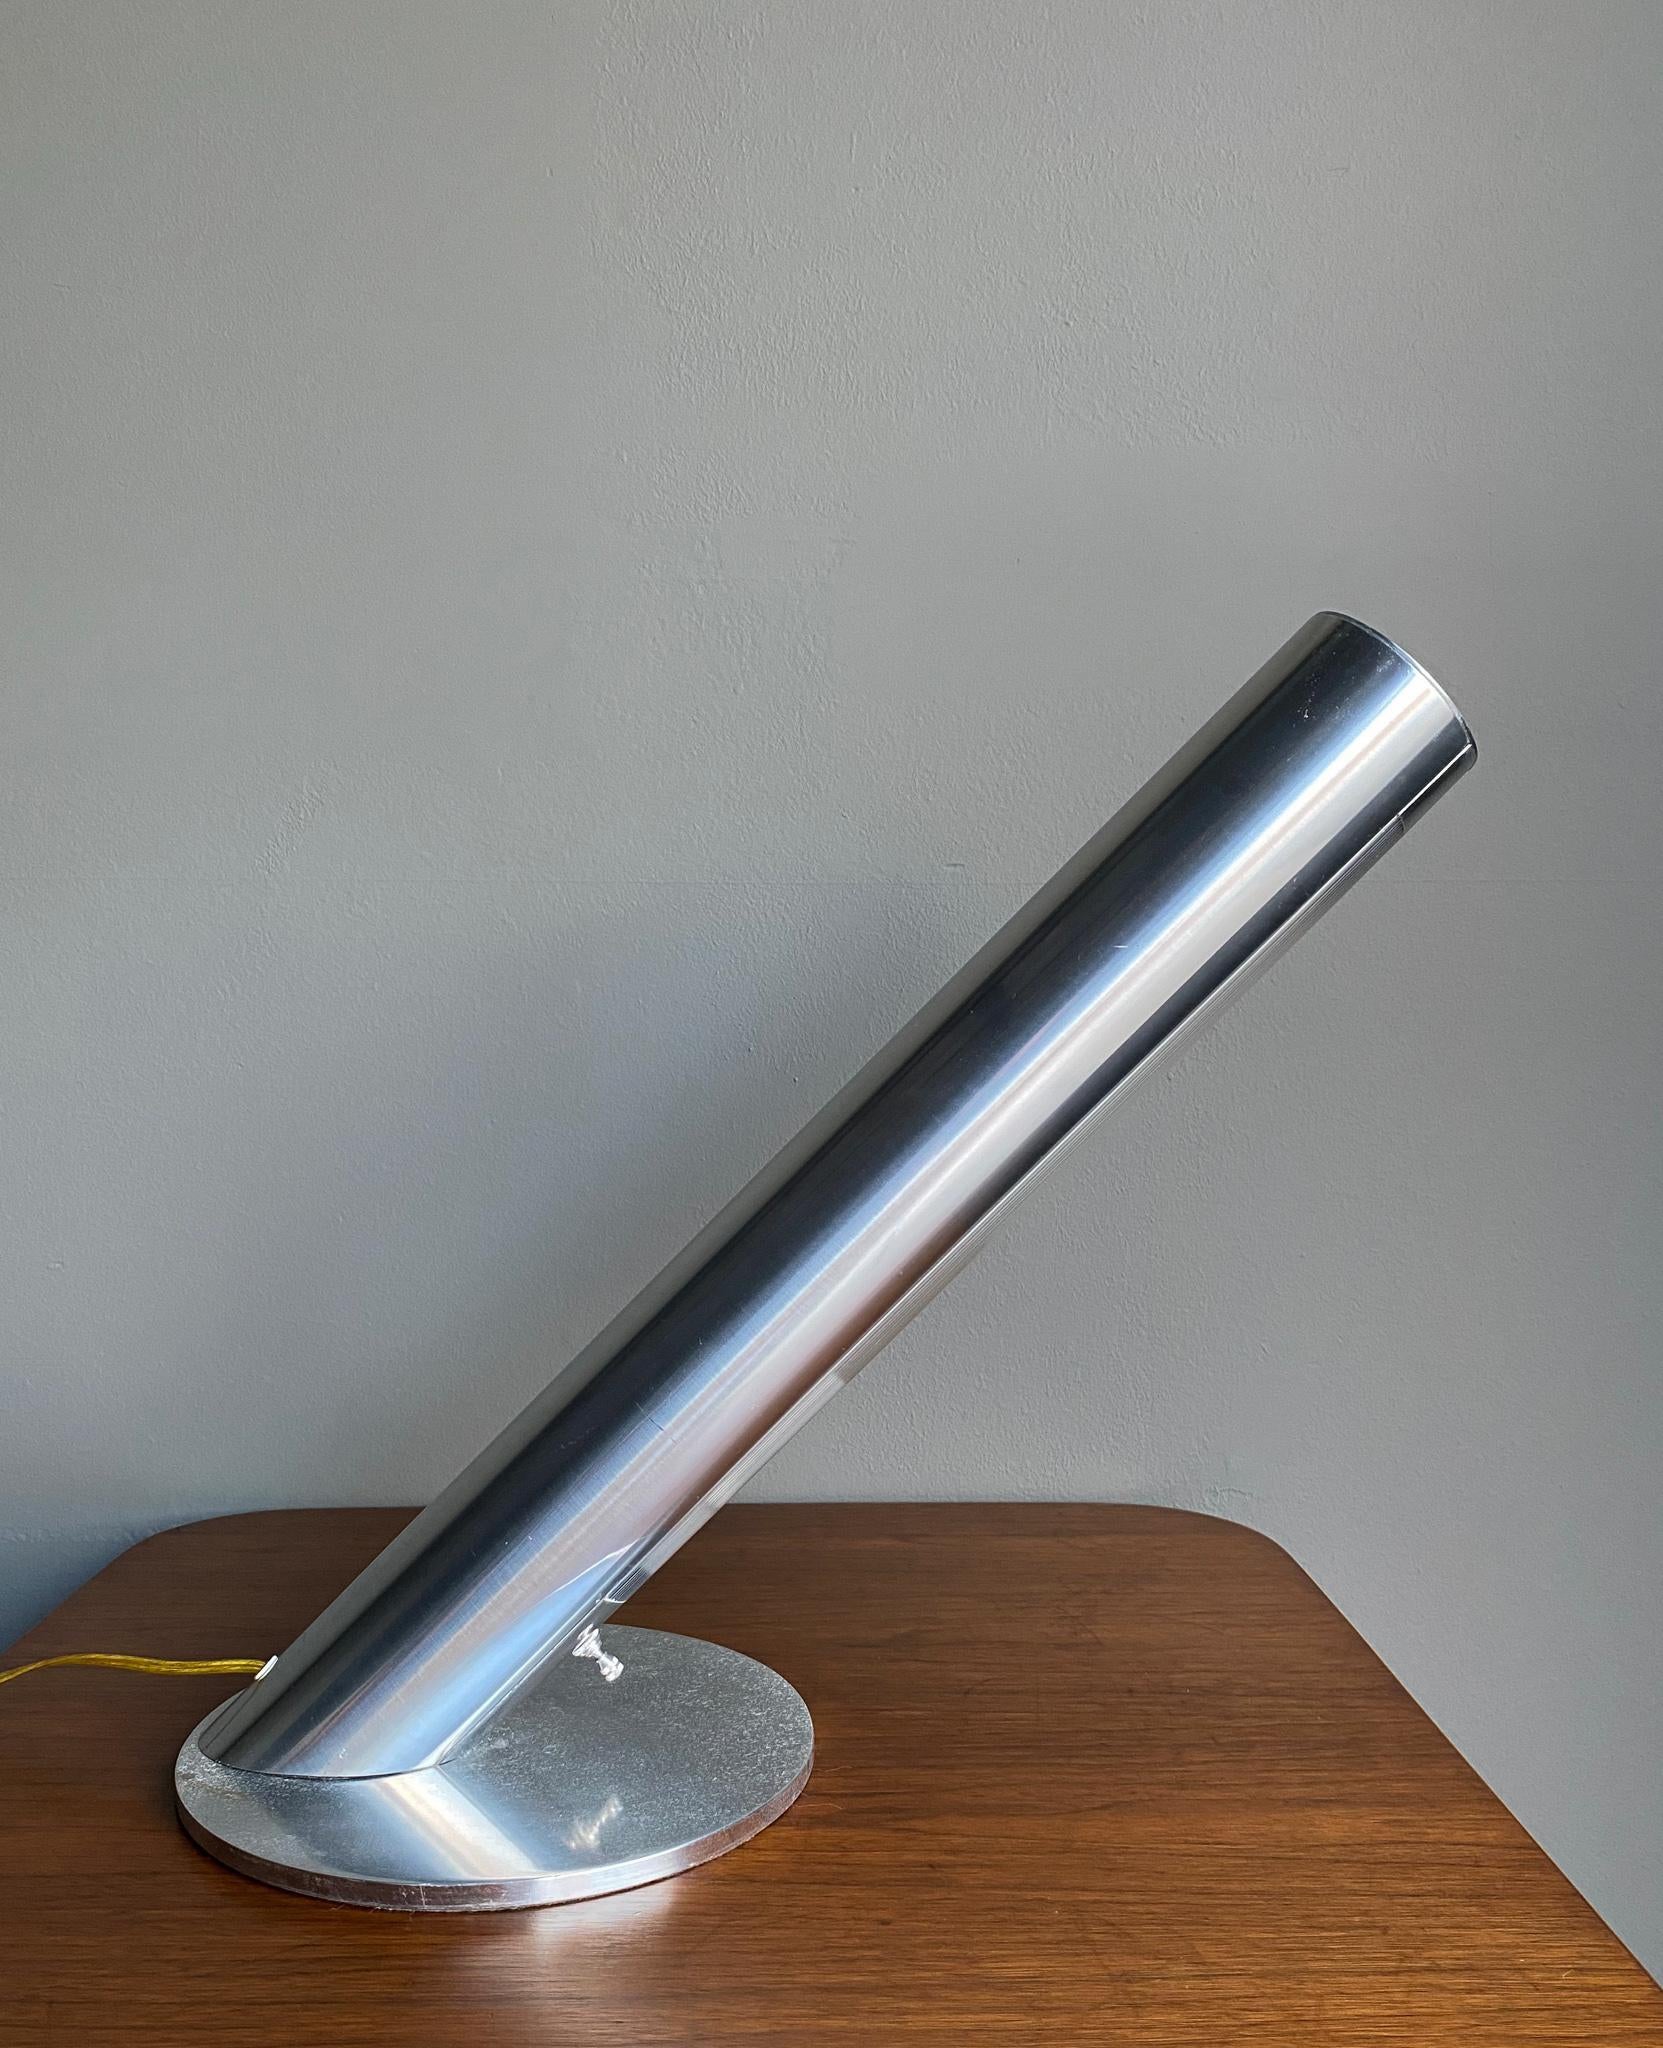 Paul Mayen Angled cylinder table lamp by for Habitat, circa 1970.